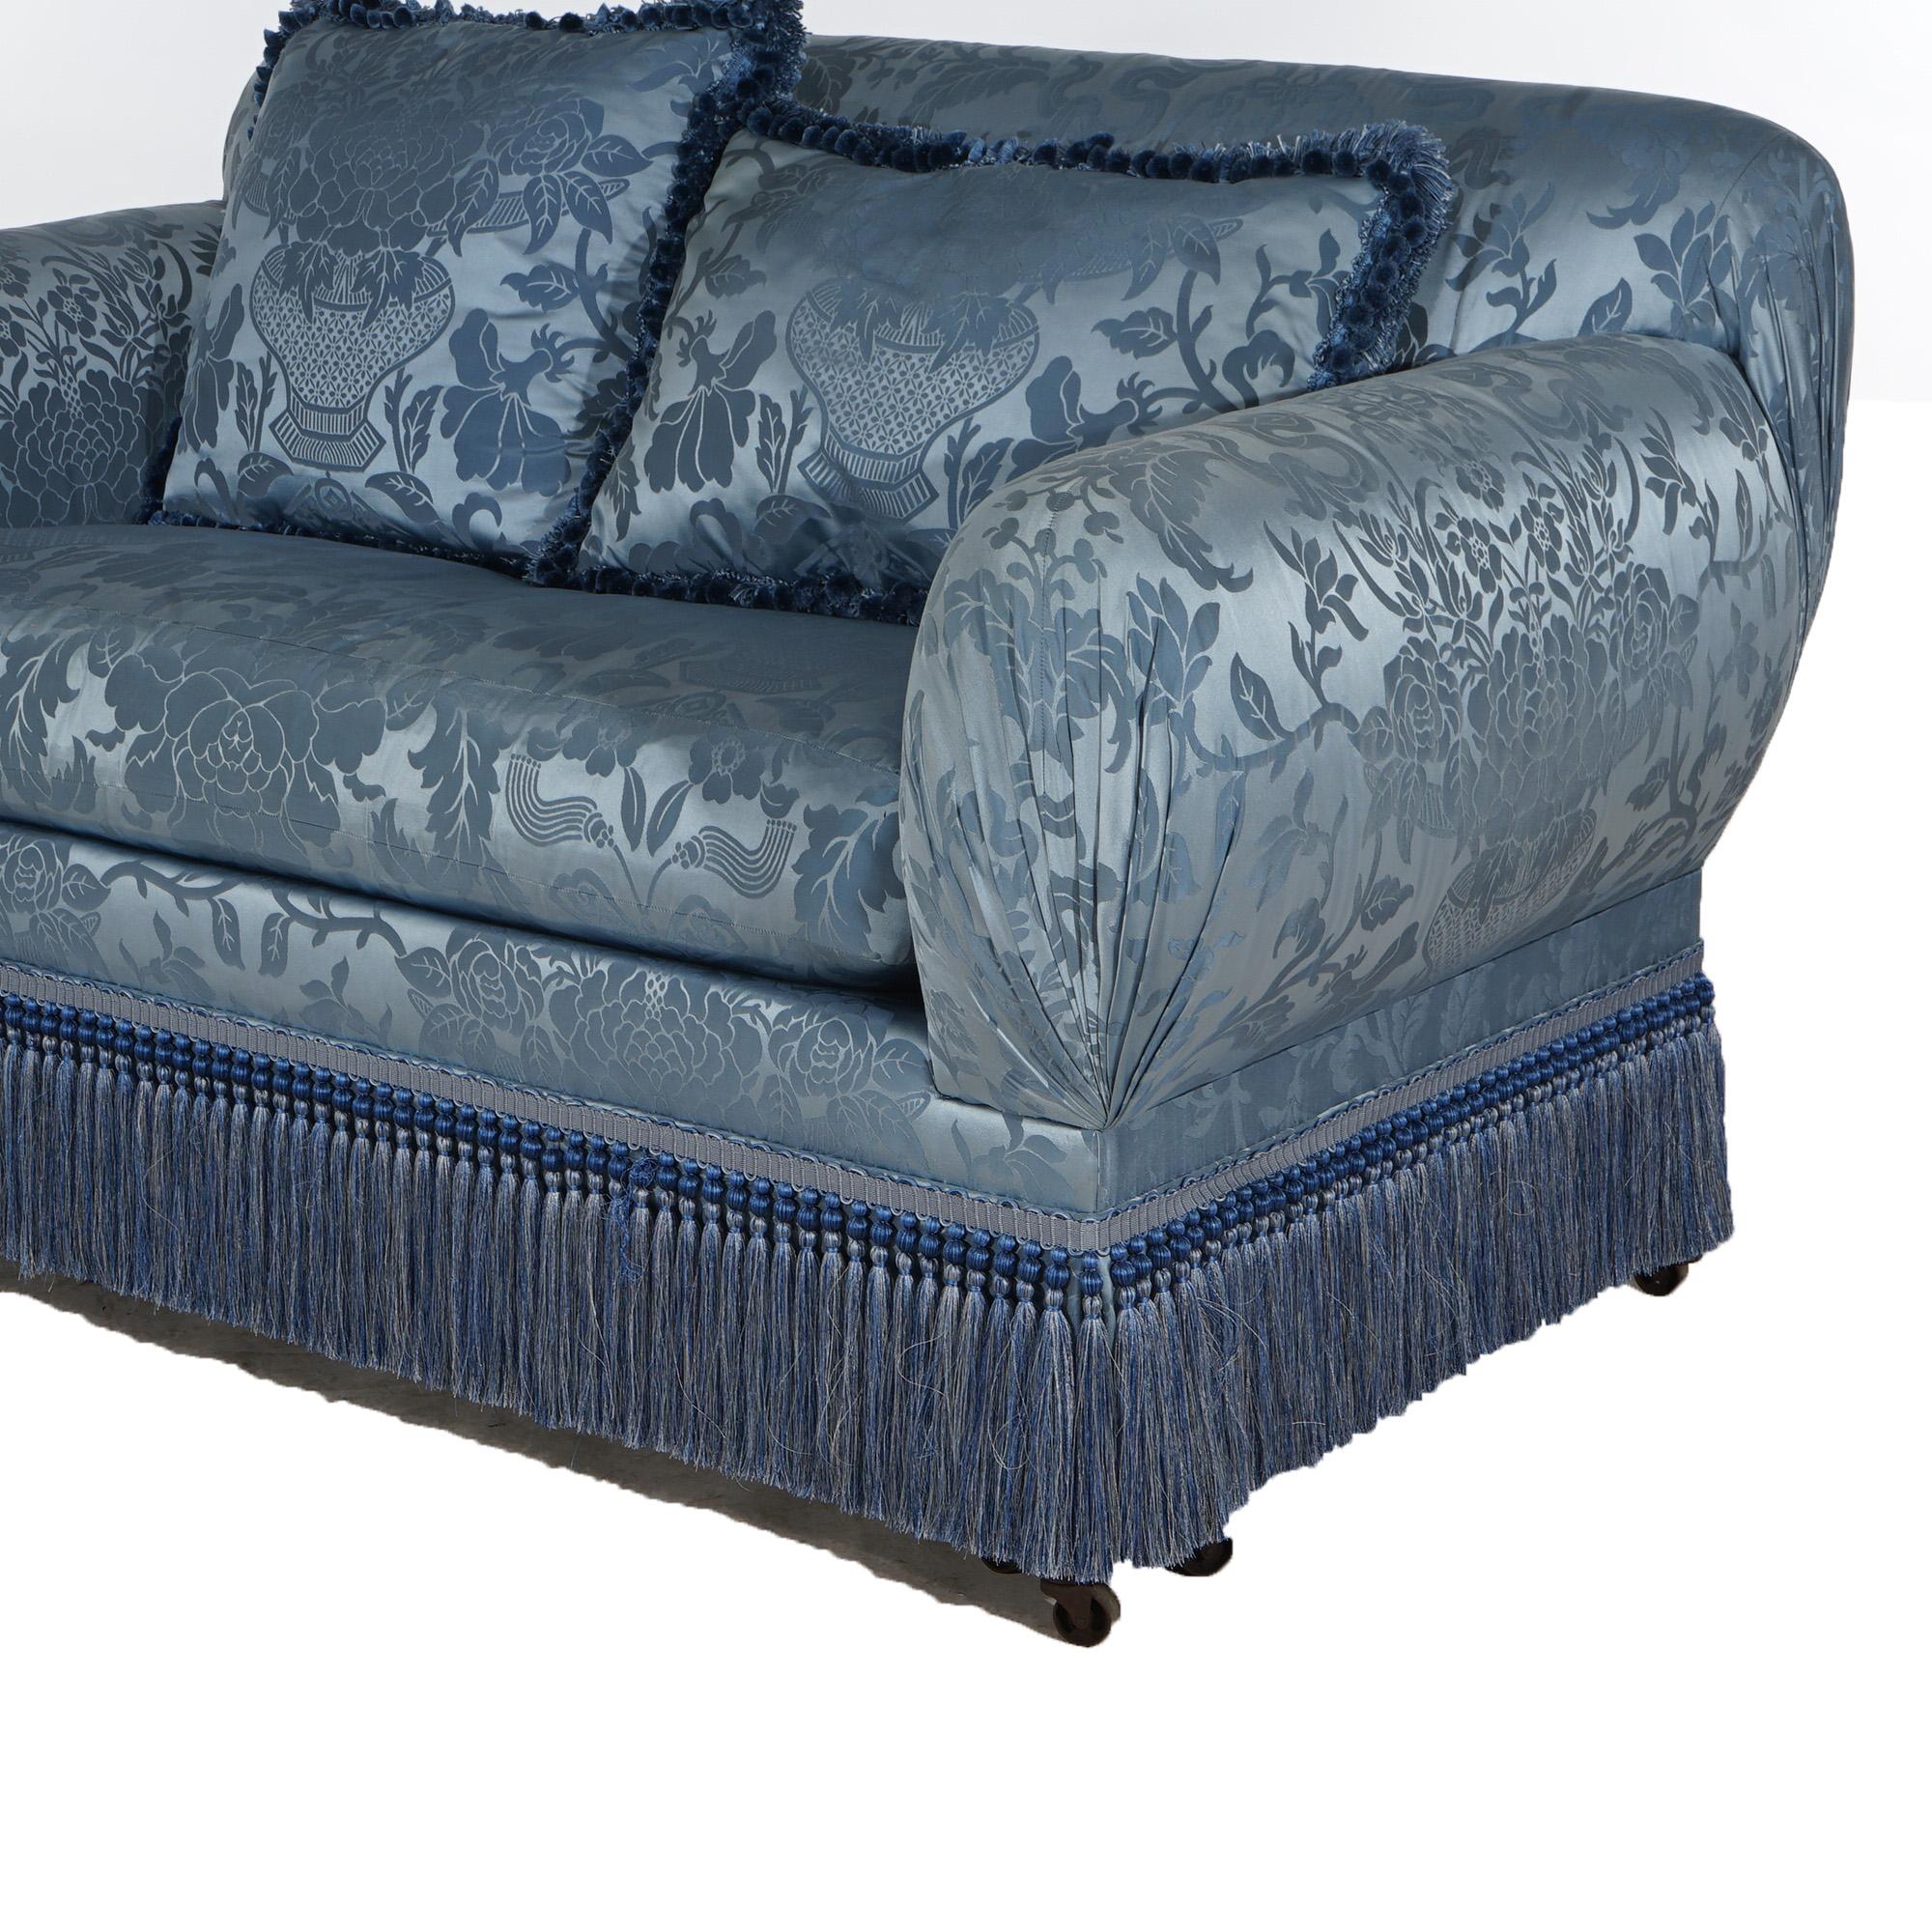 Hollywood Regency Upholstered Overstuffed Settee with Fringe Skirt 20thC In Good Condition For Sale In Big Flats, NY